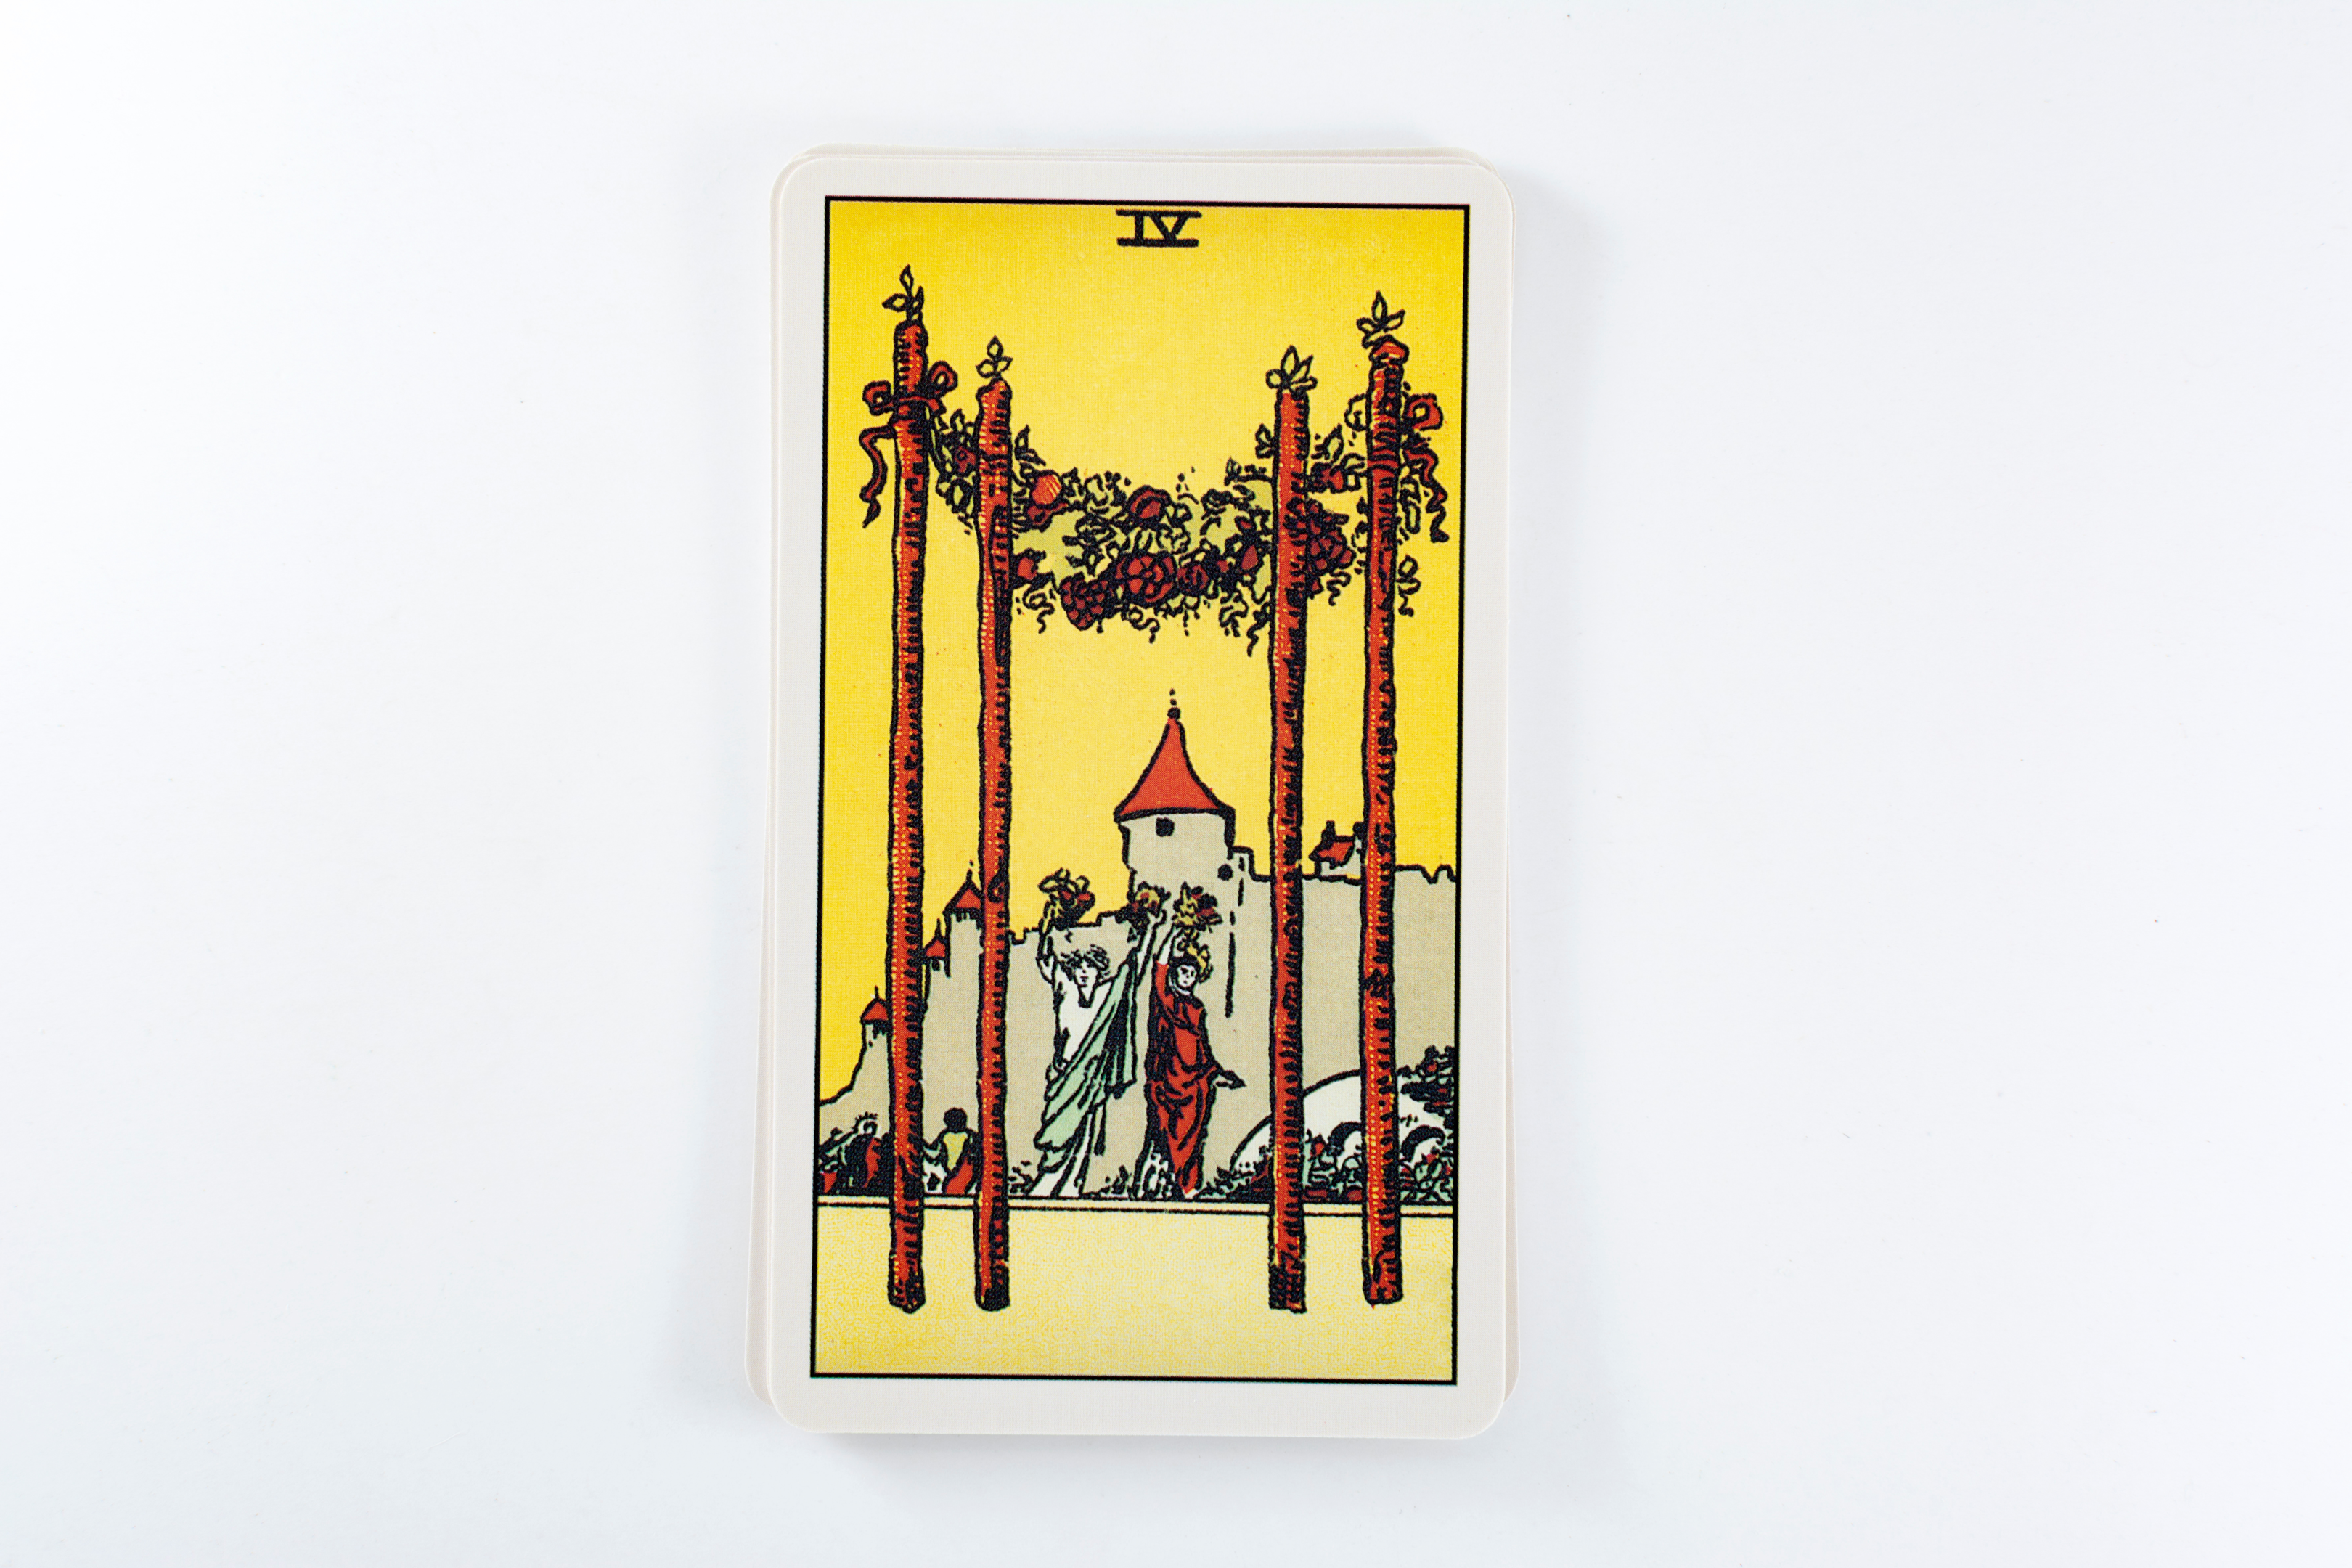 four of wands, two women celebrating with flowers, yellow background